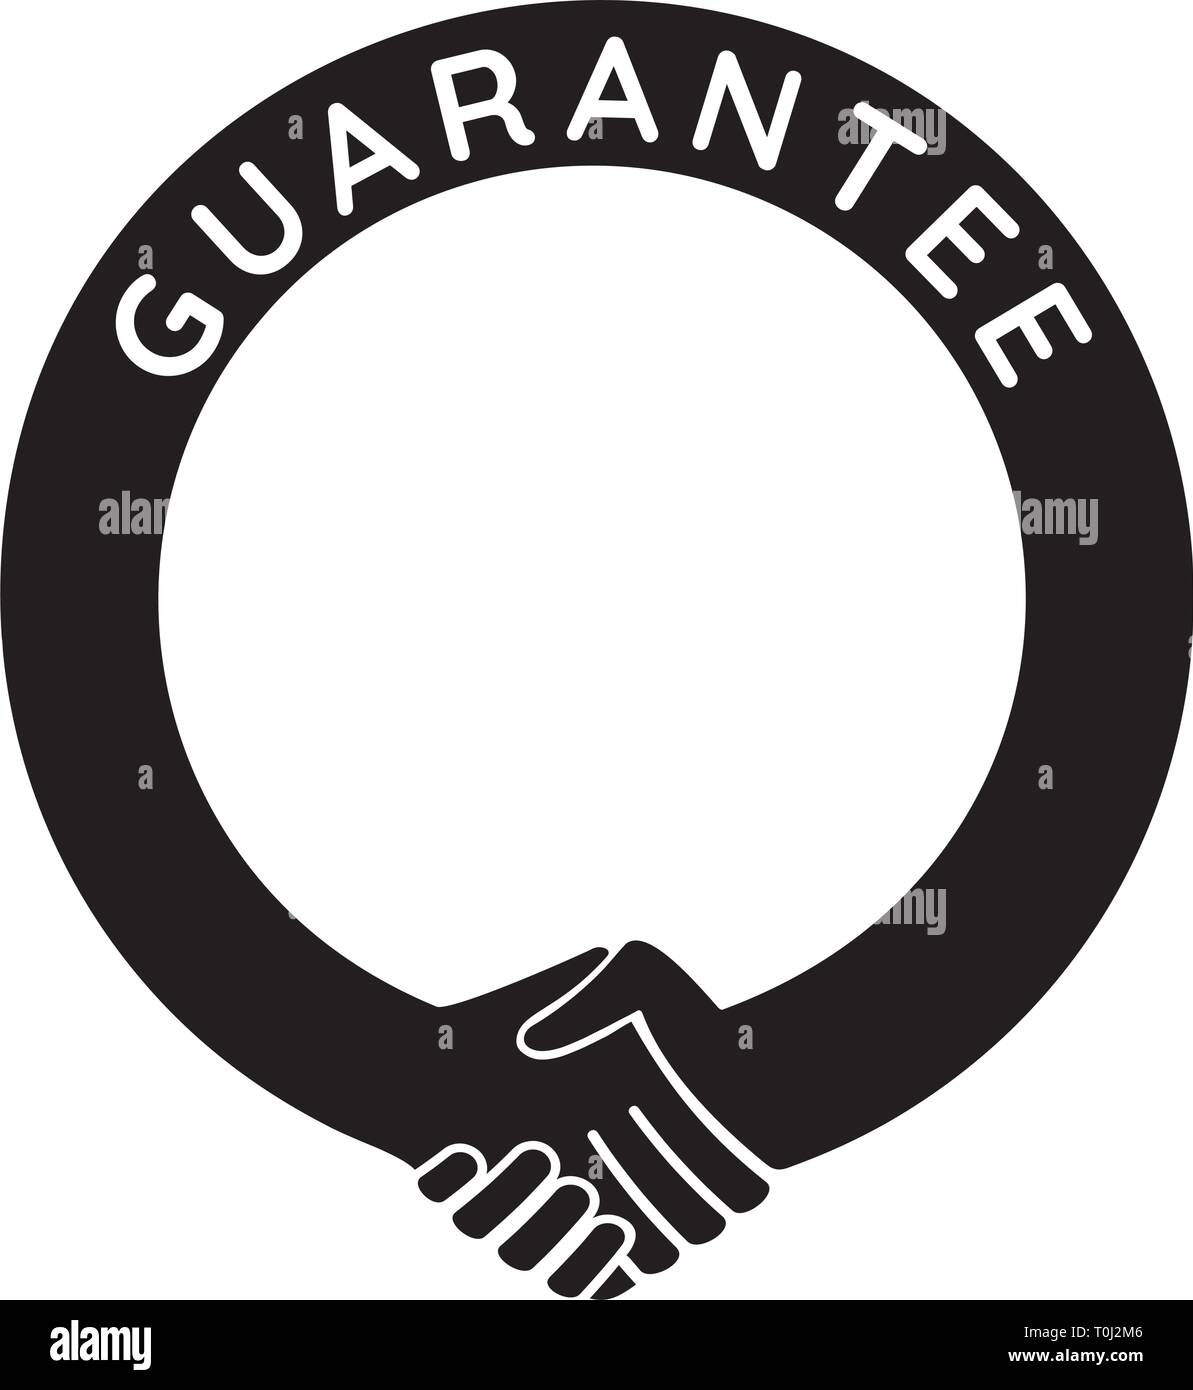 guarantee - round handshake template,   put any number or text in the frame Stock Vector